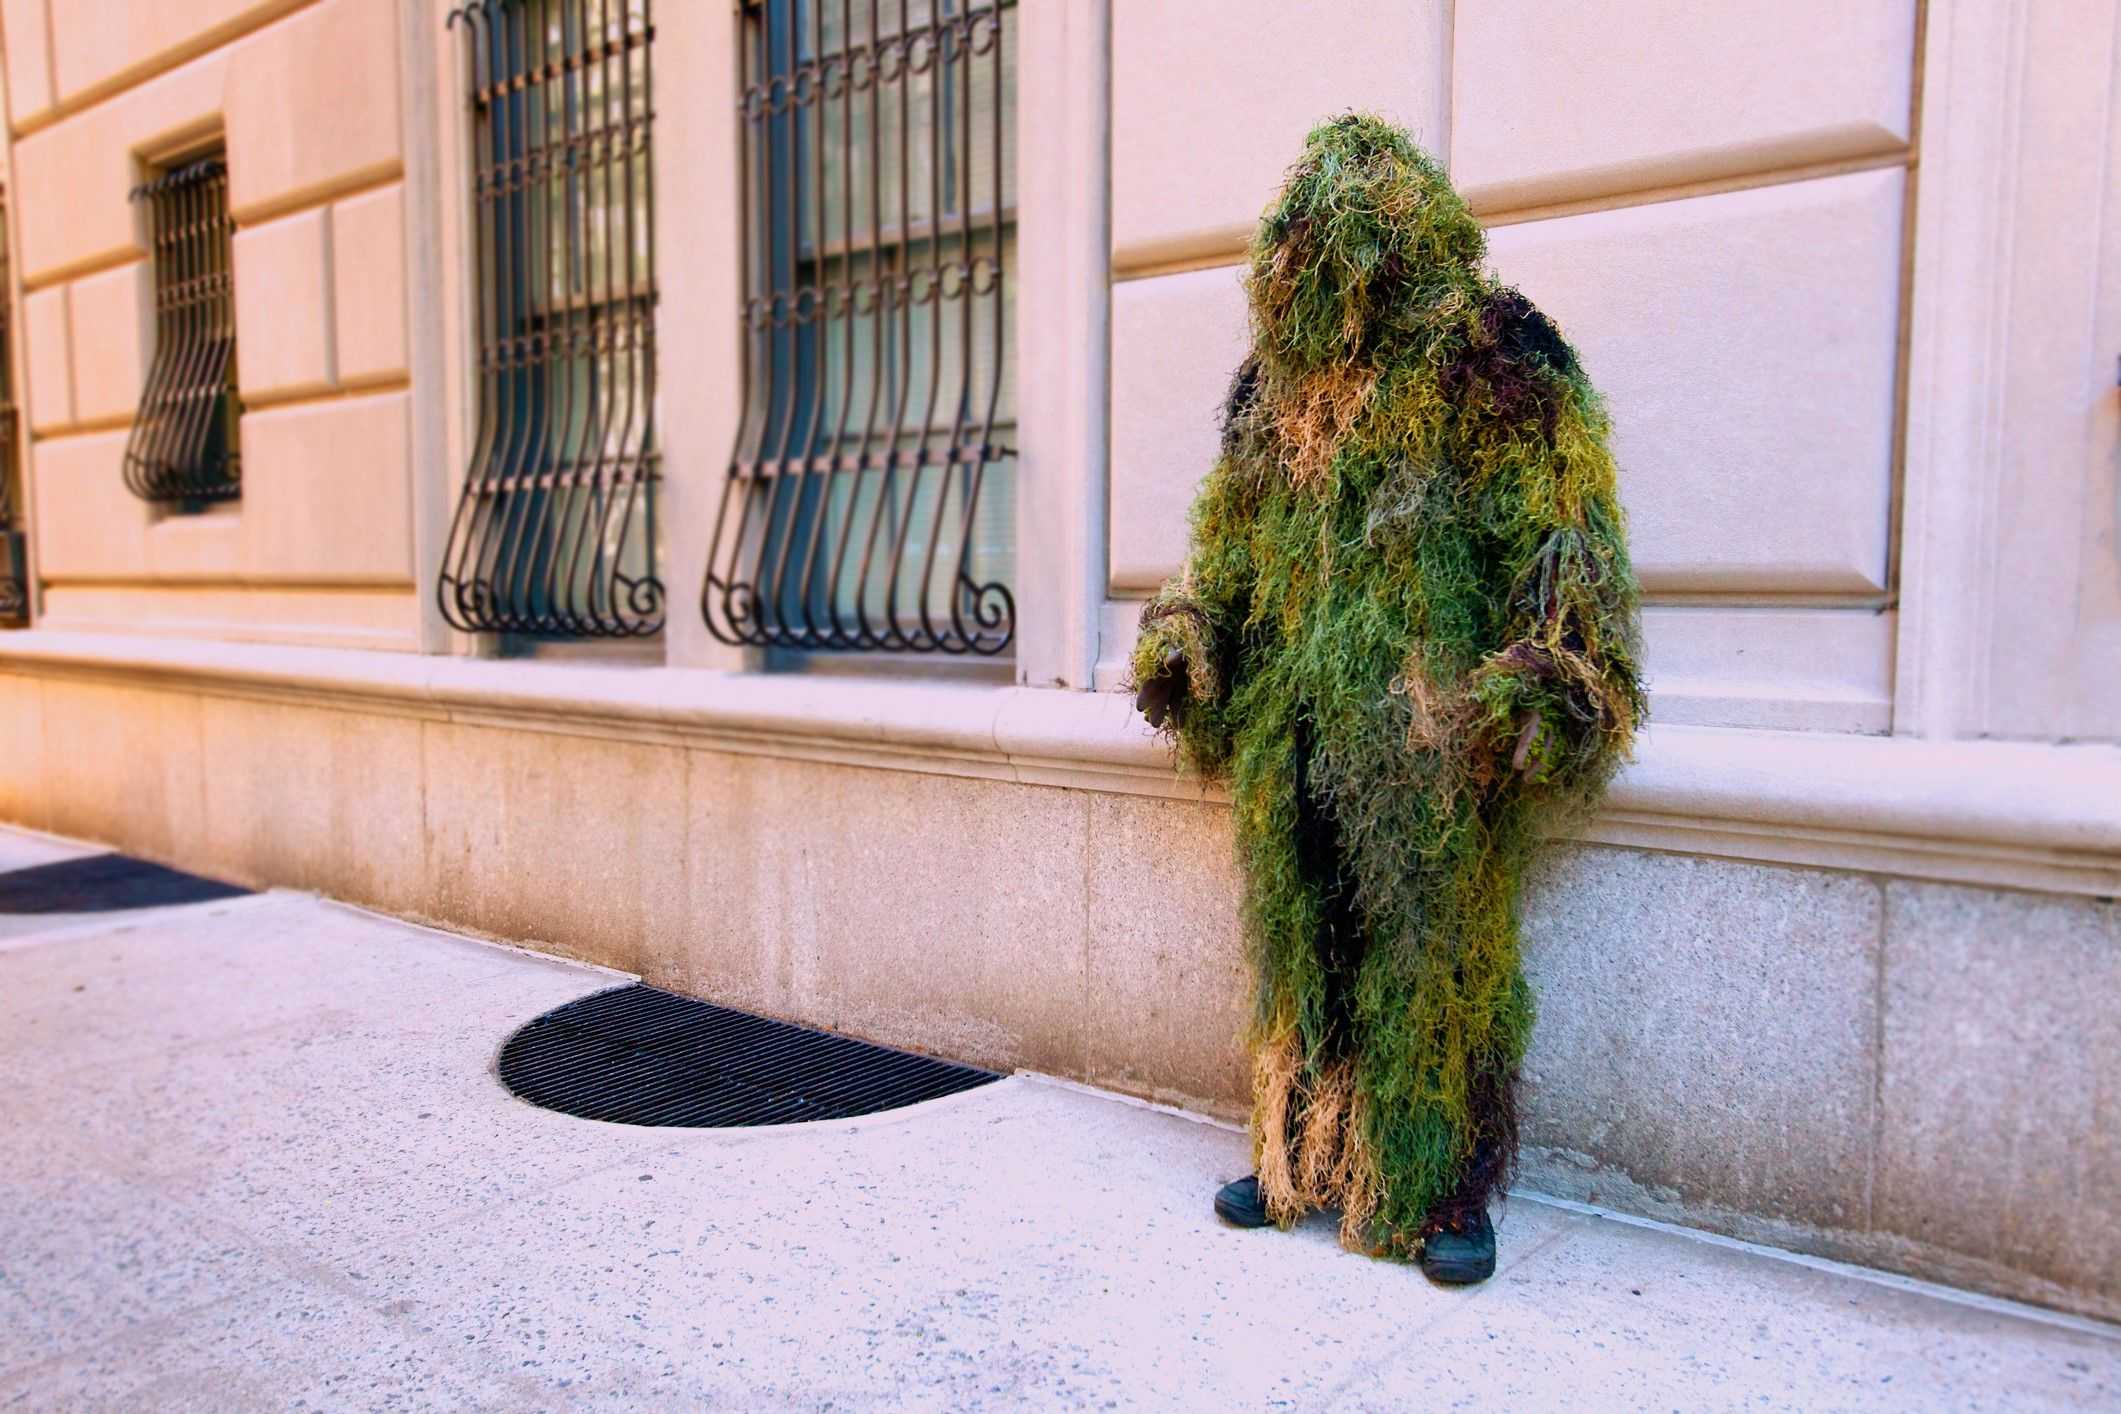 A man in a mass costume is standing on the street leaning at a wall